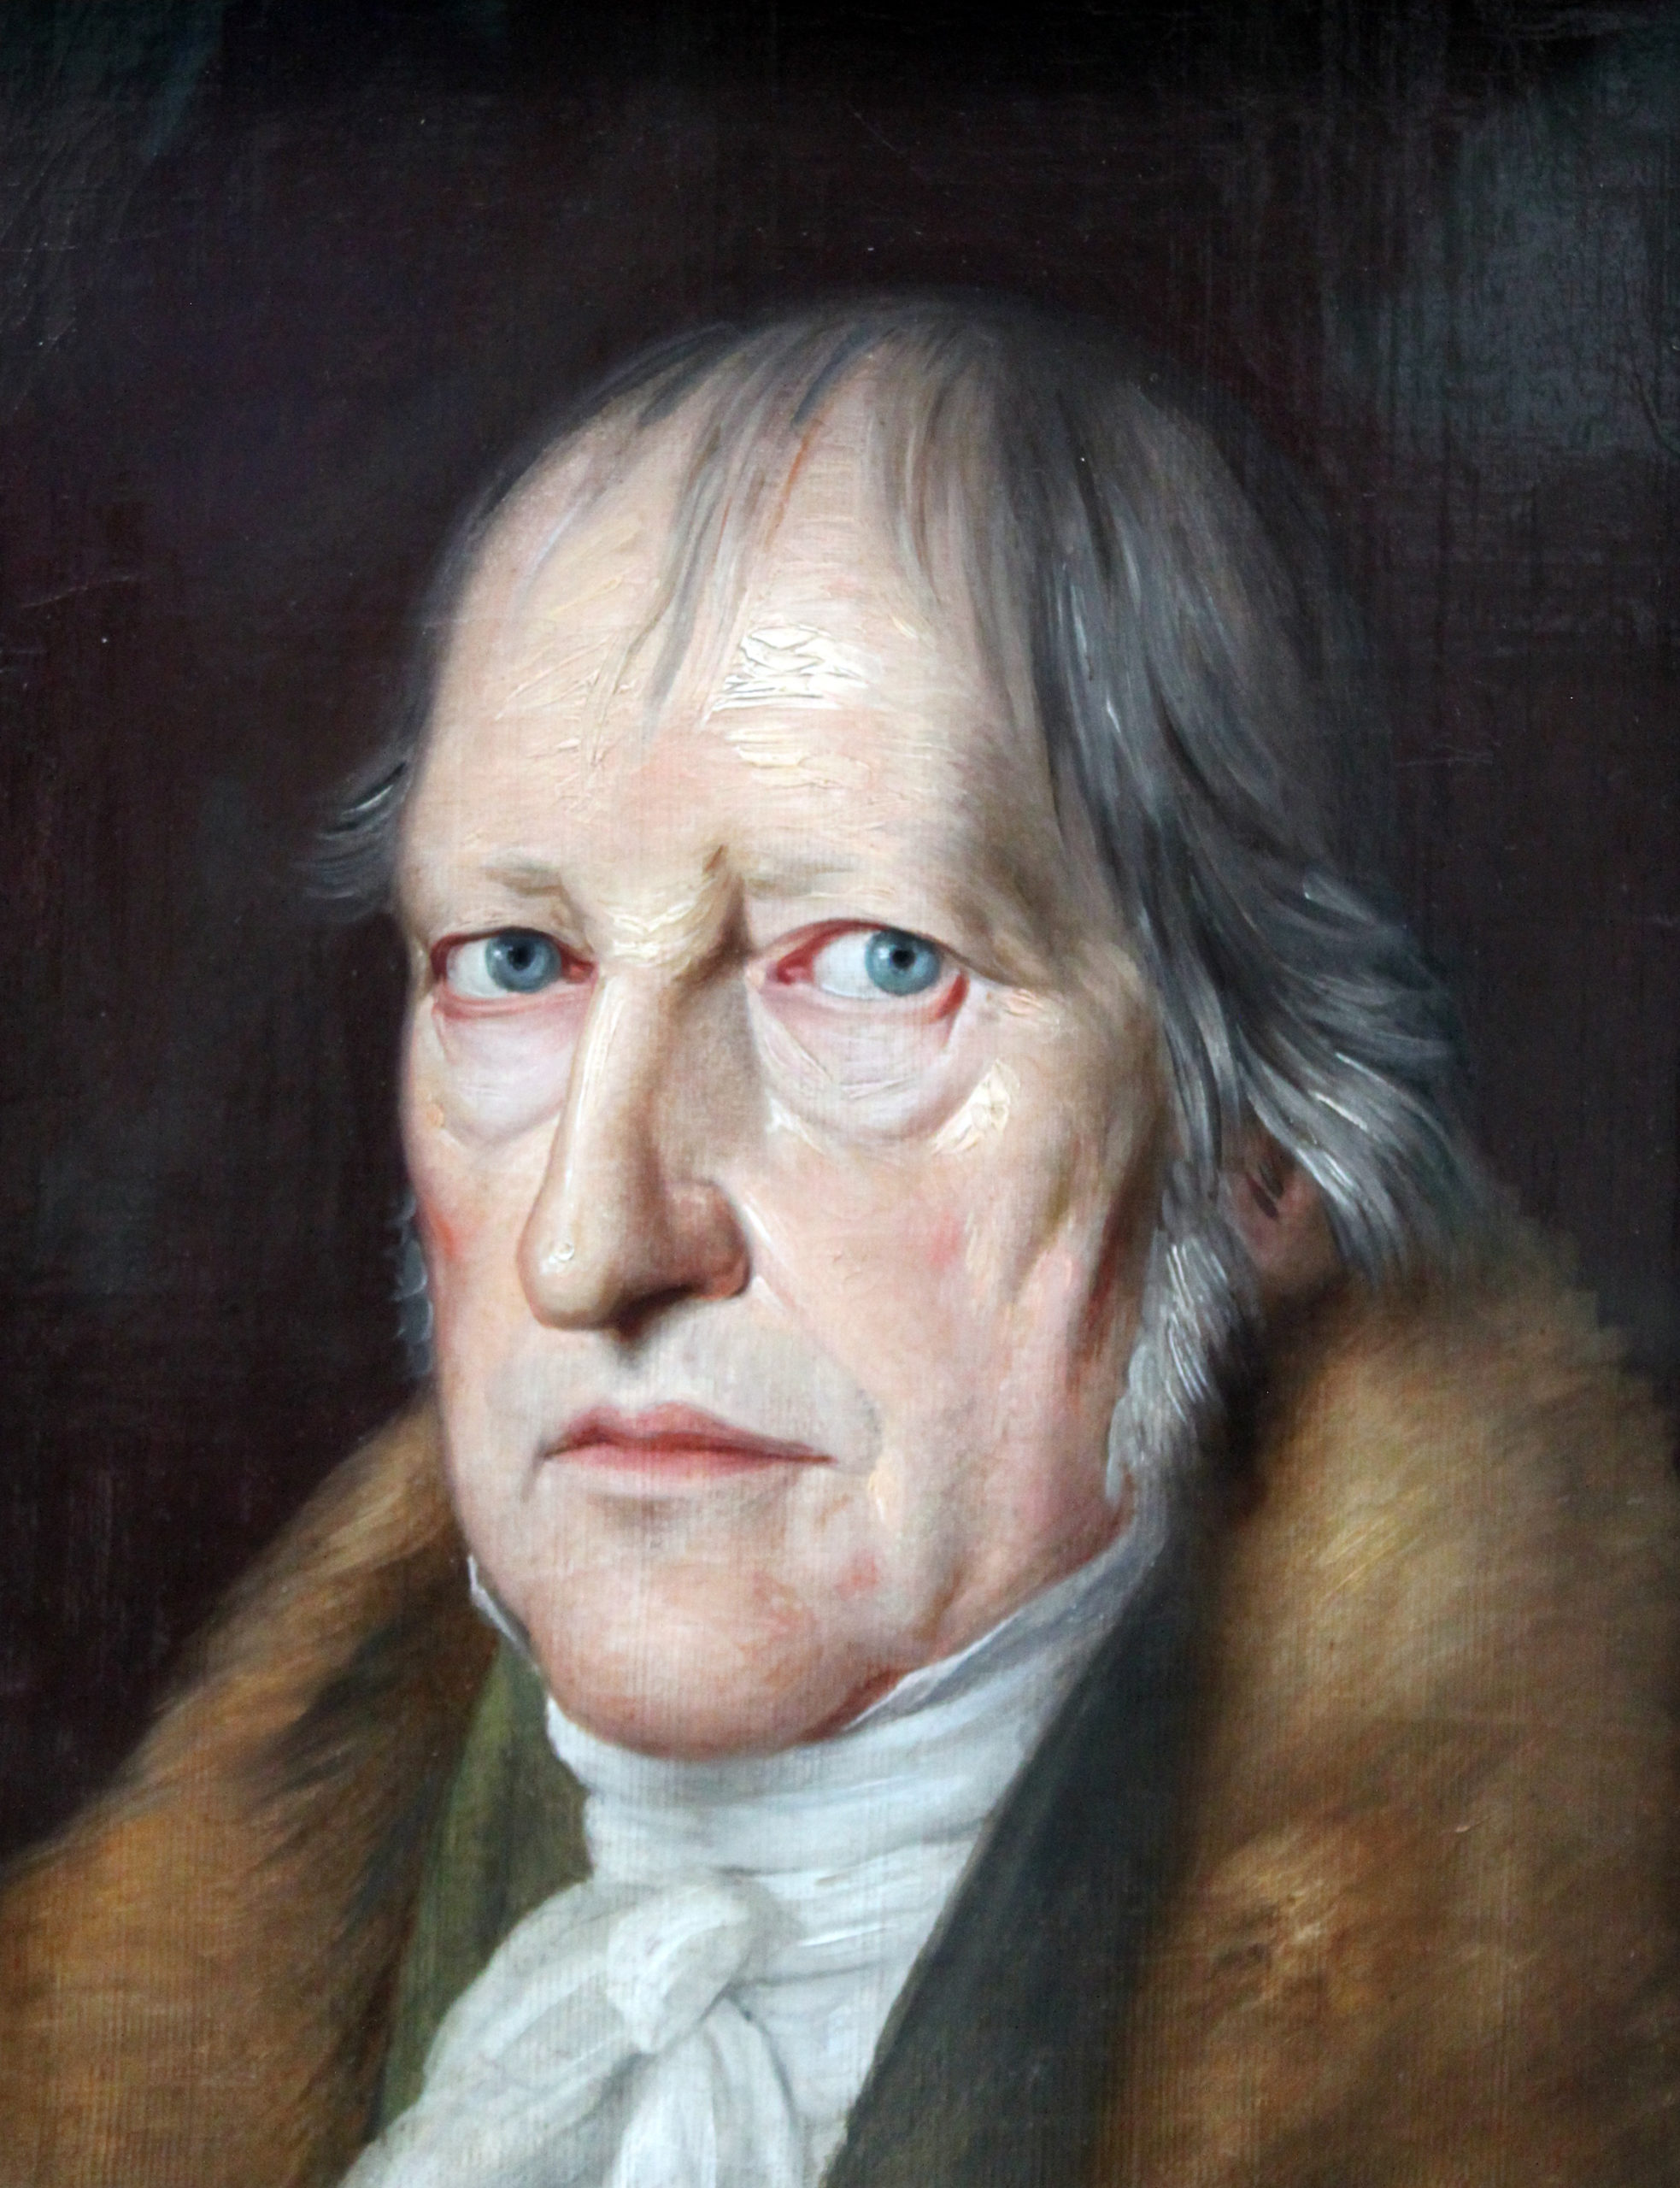 The difficulty with Hegel